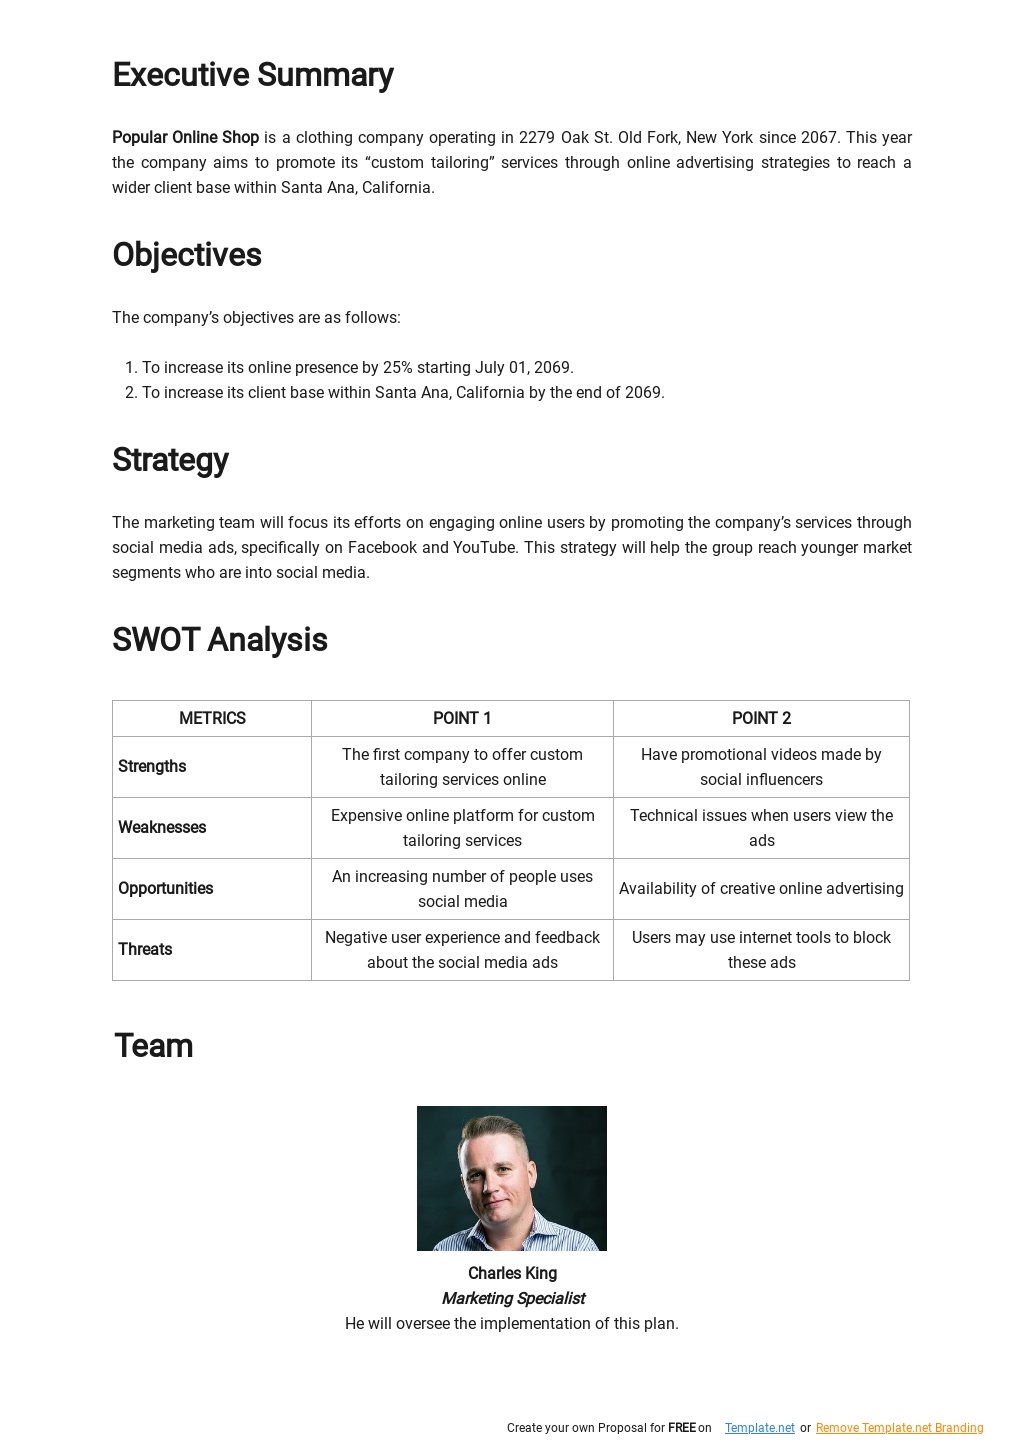 business plan template for job promotion